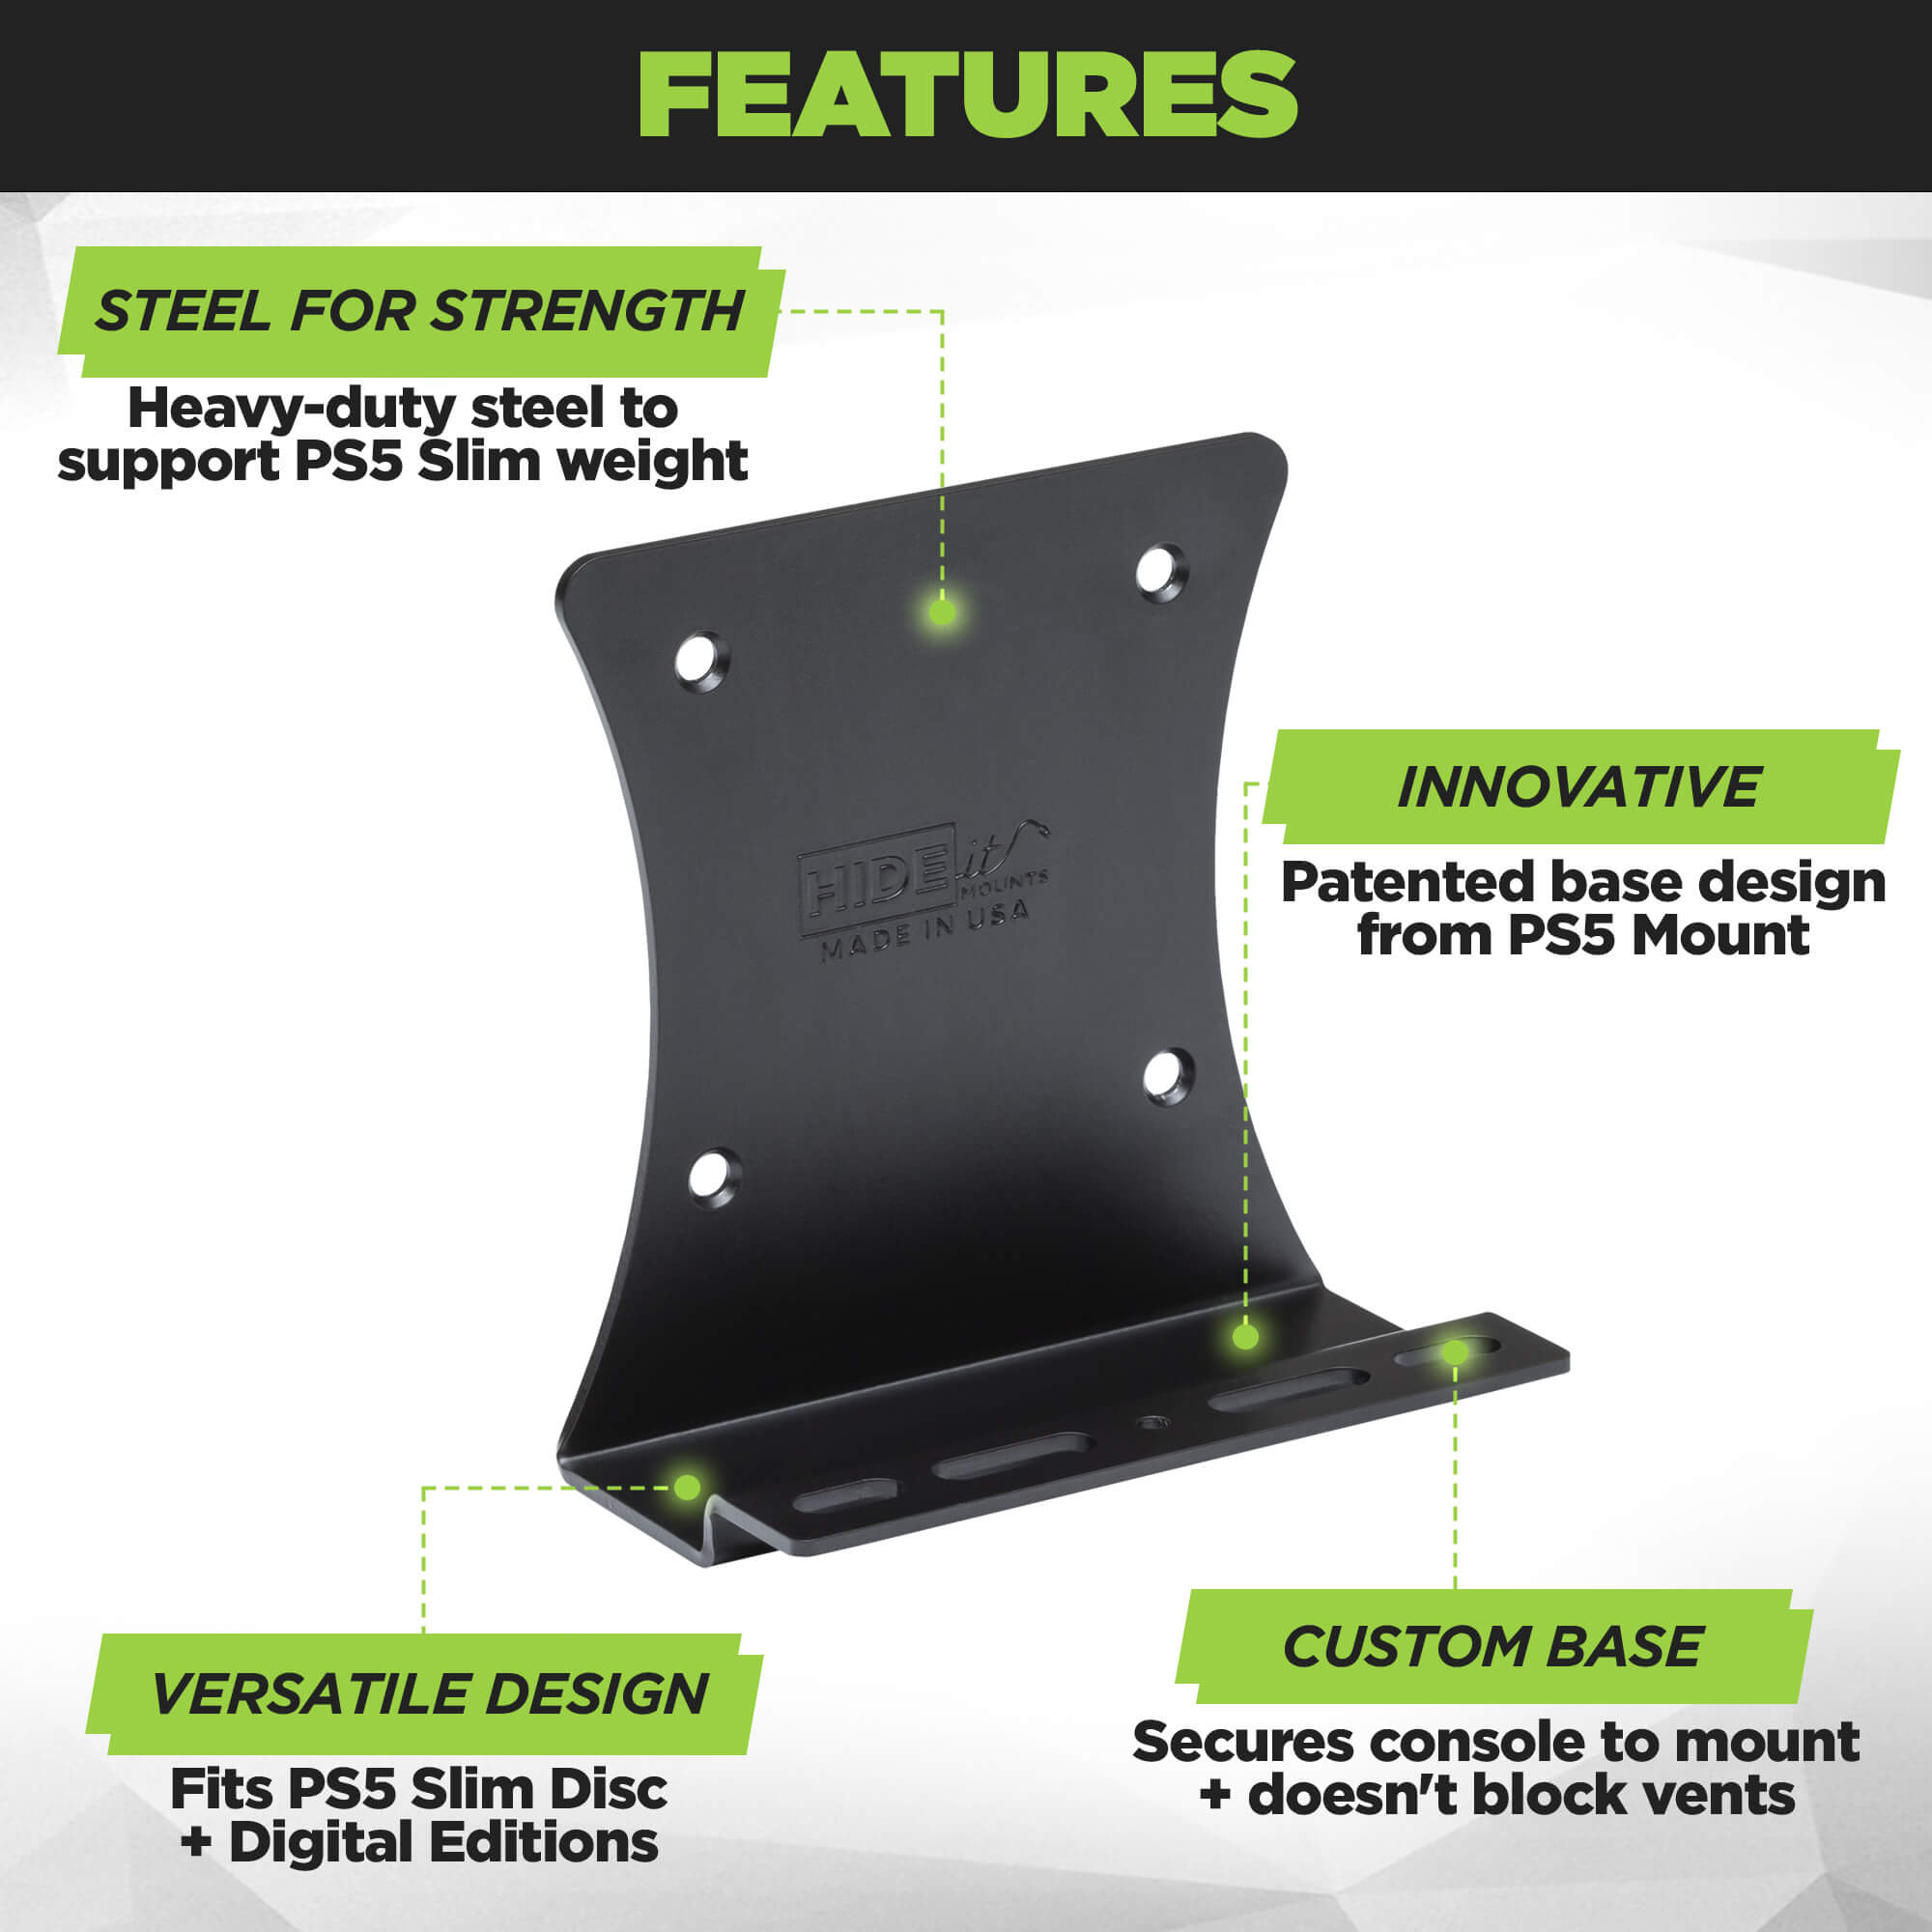 Sony Secure Mounting Mechanism helps to secure the PS5 Slim in the HIDEit 5S Wall Mount. Base of the wall mount supports most of the PS5 weight.